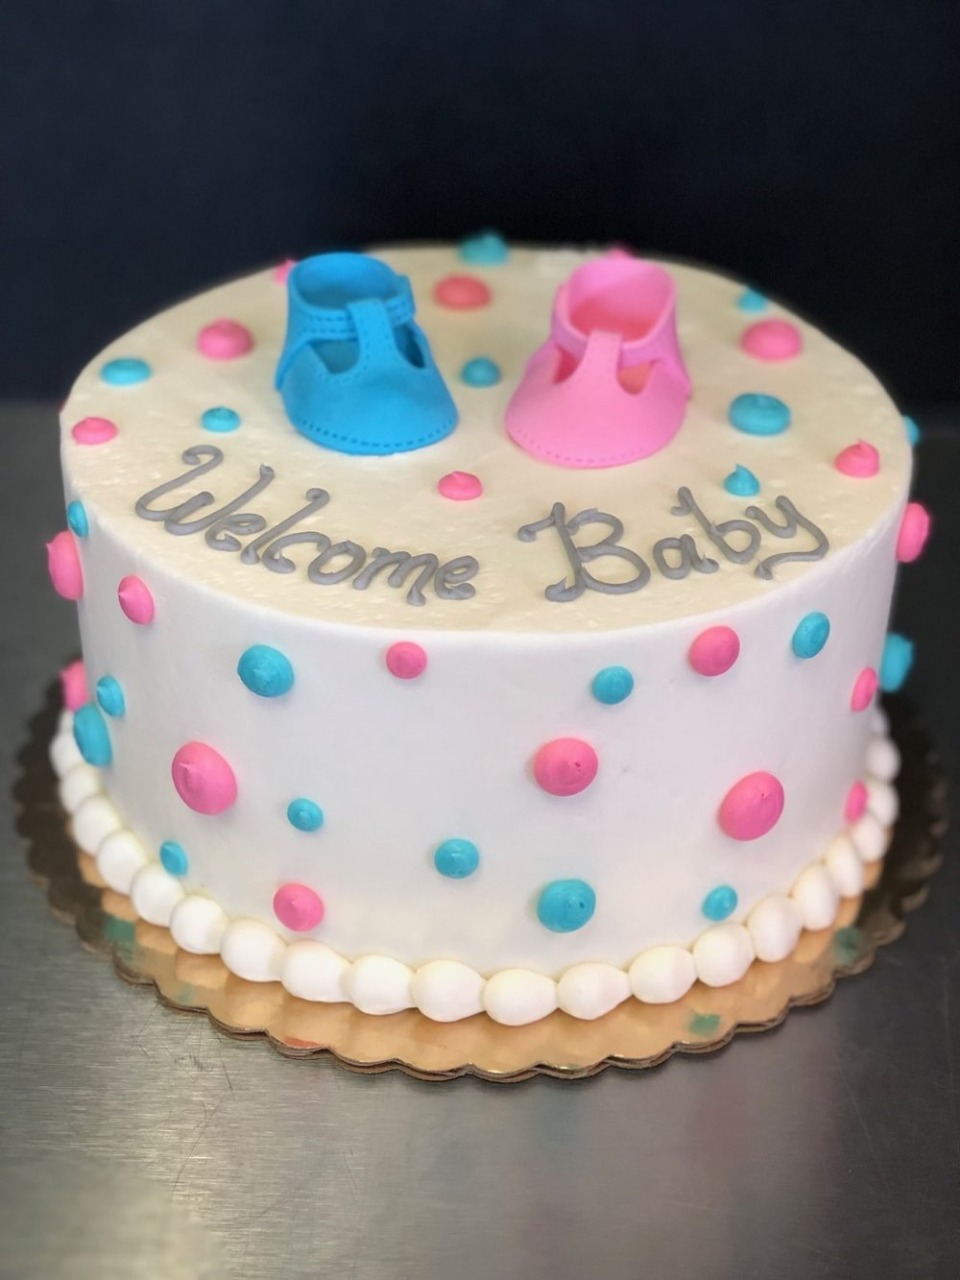 - Baby Shower Cake | Baby shower cake | Cake Delivery in Bhubaneswar Order Online Cakes Cakes on Hand